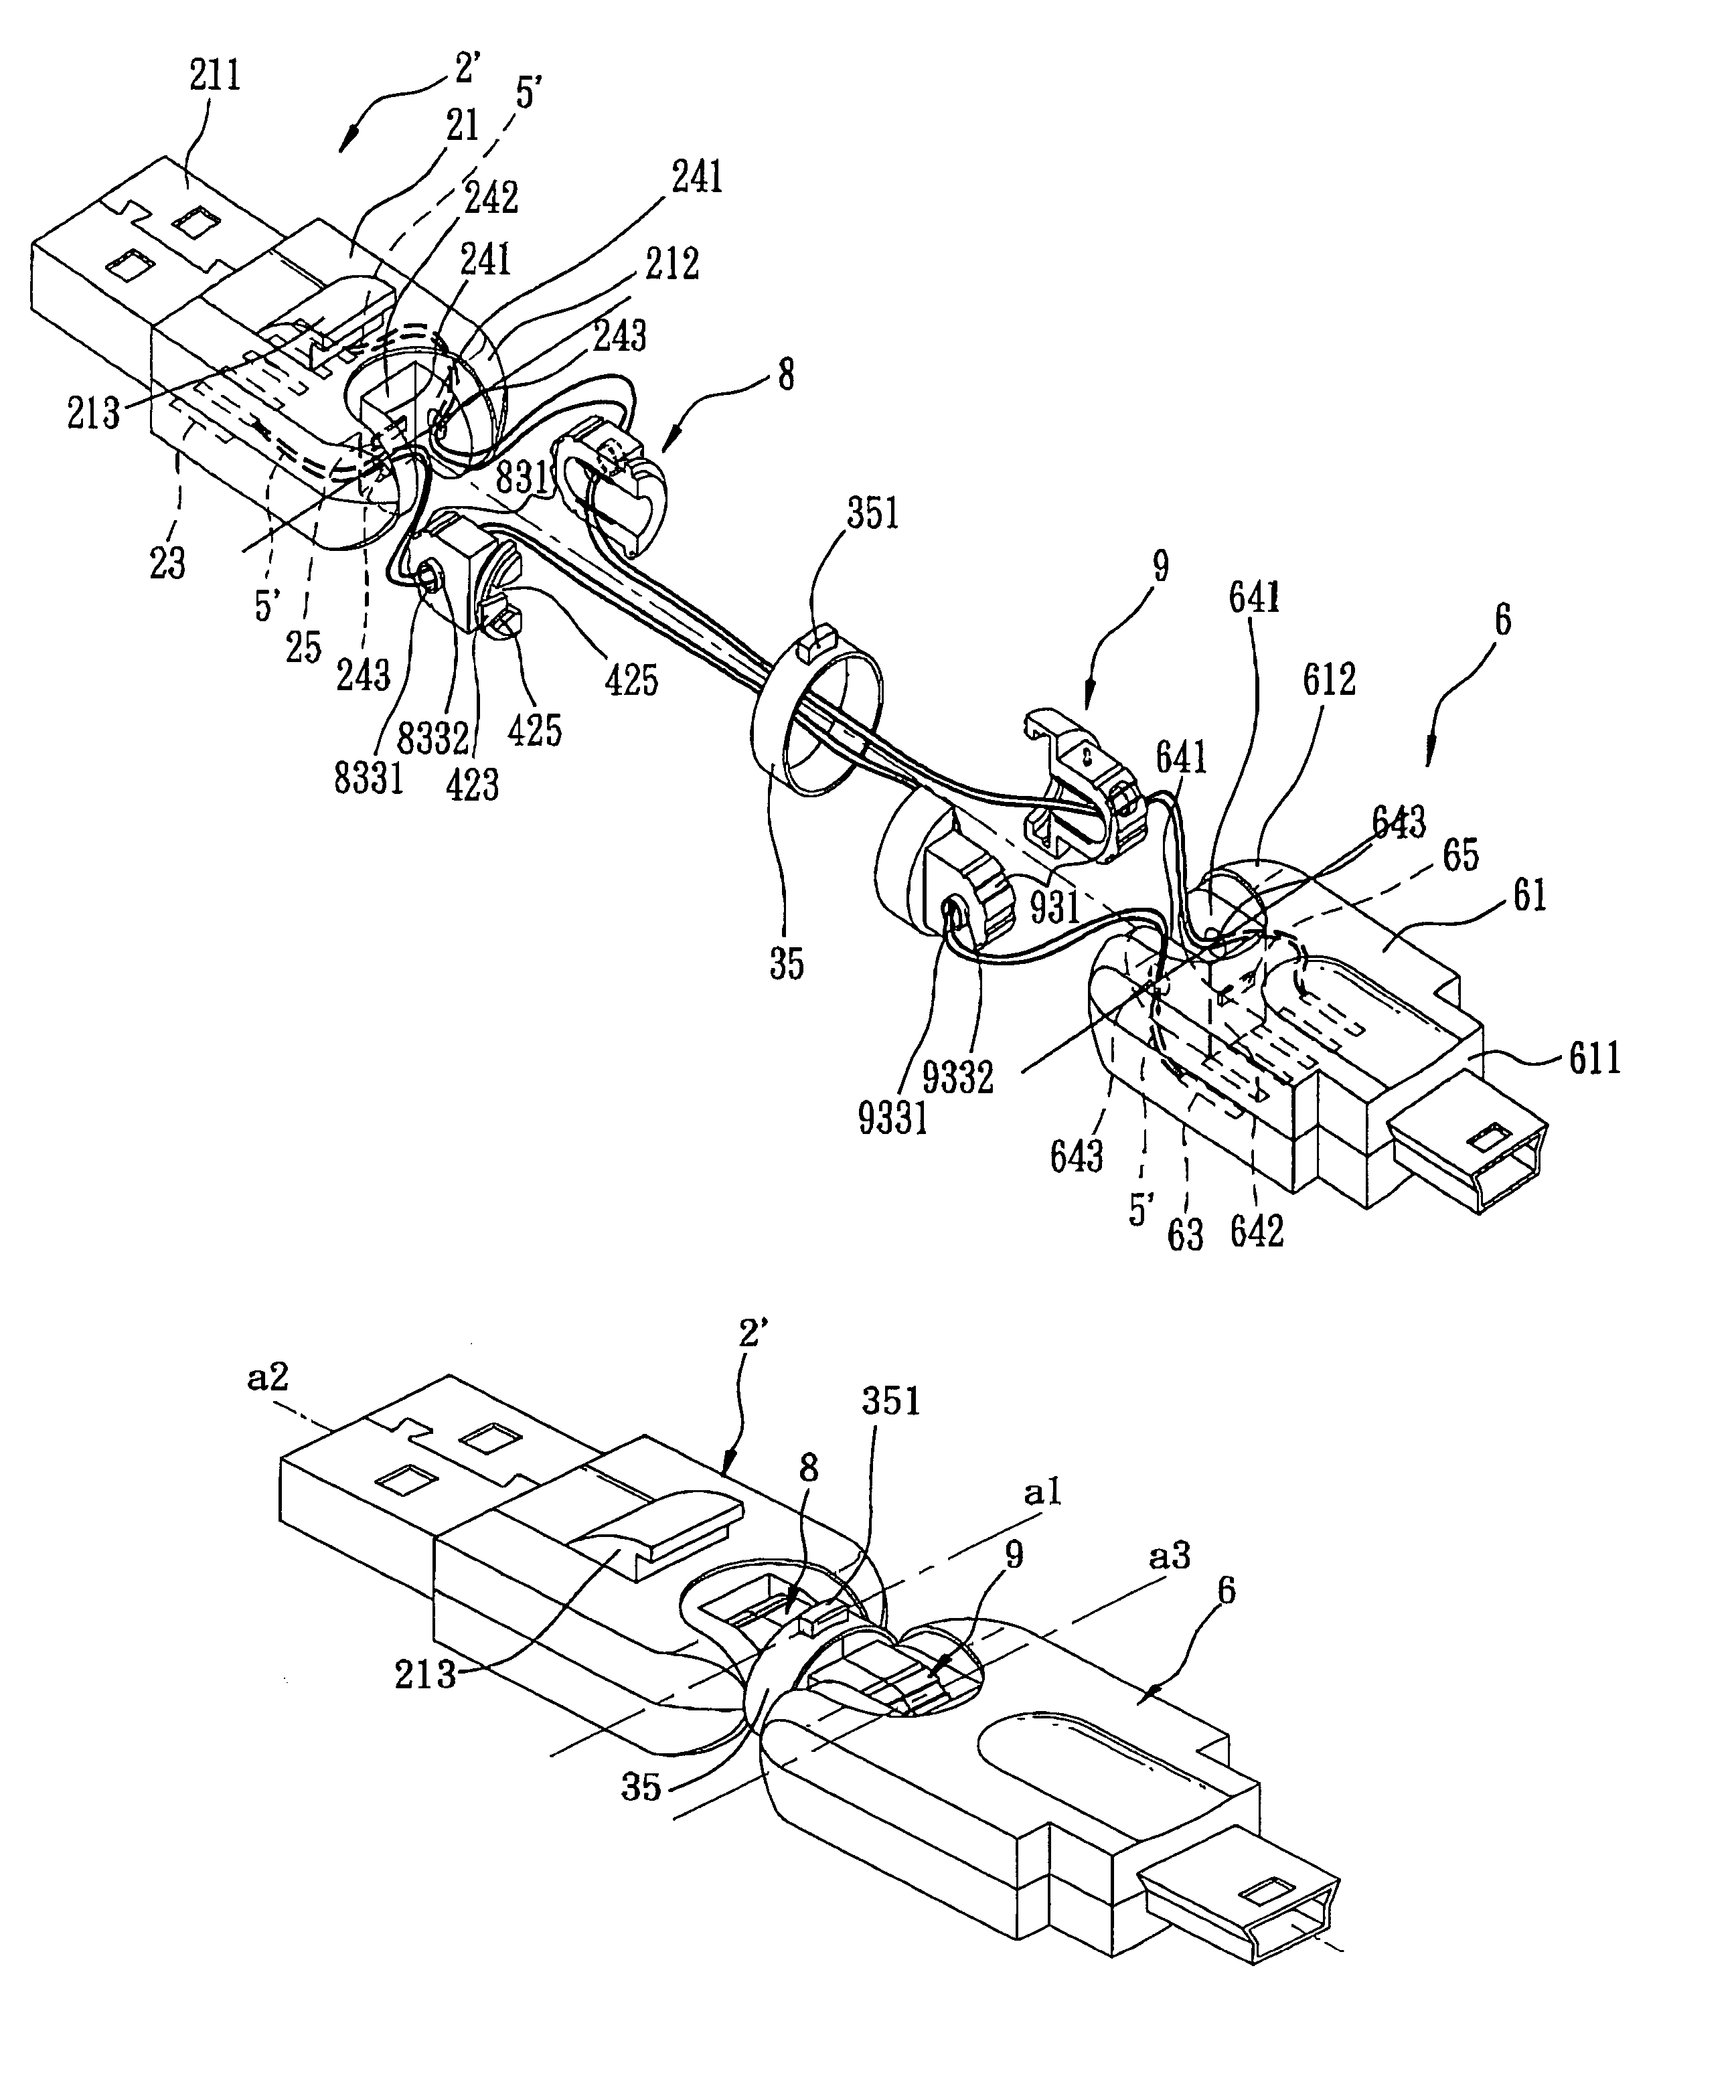 Electronic device having a pivotable electrical connector, and electrical connector assembly